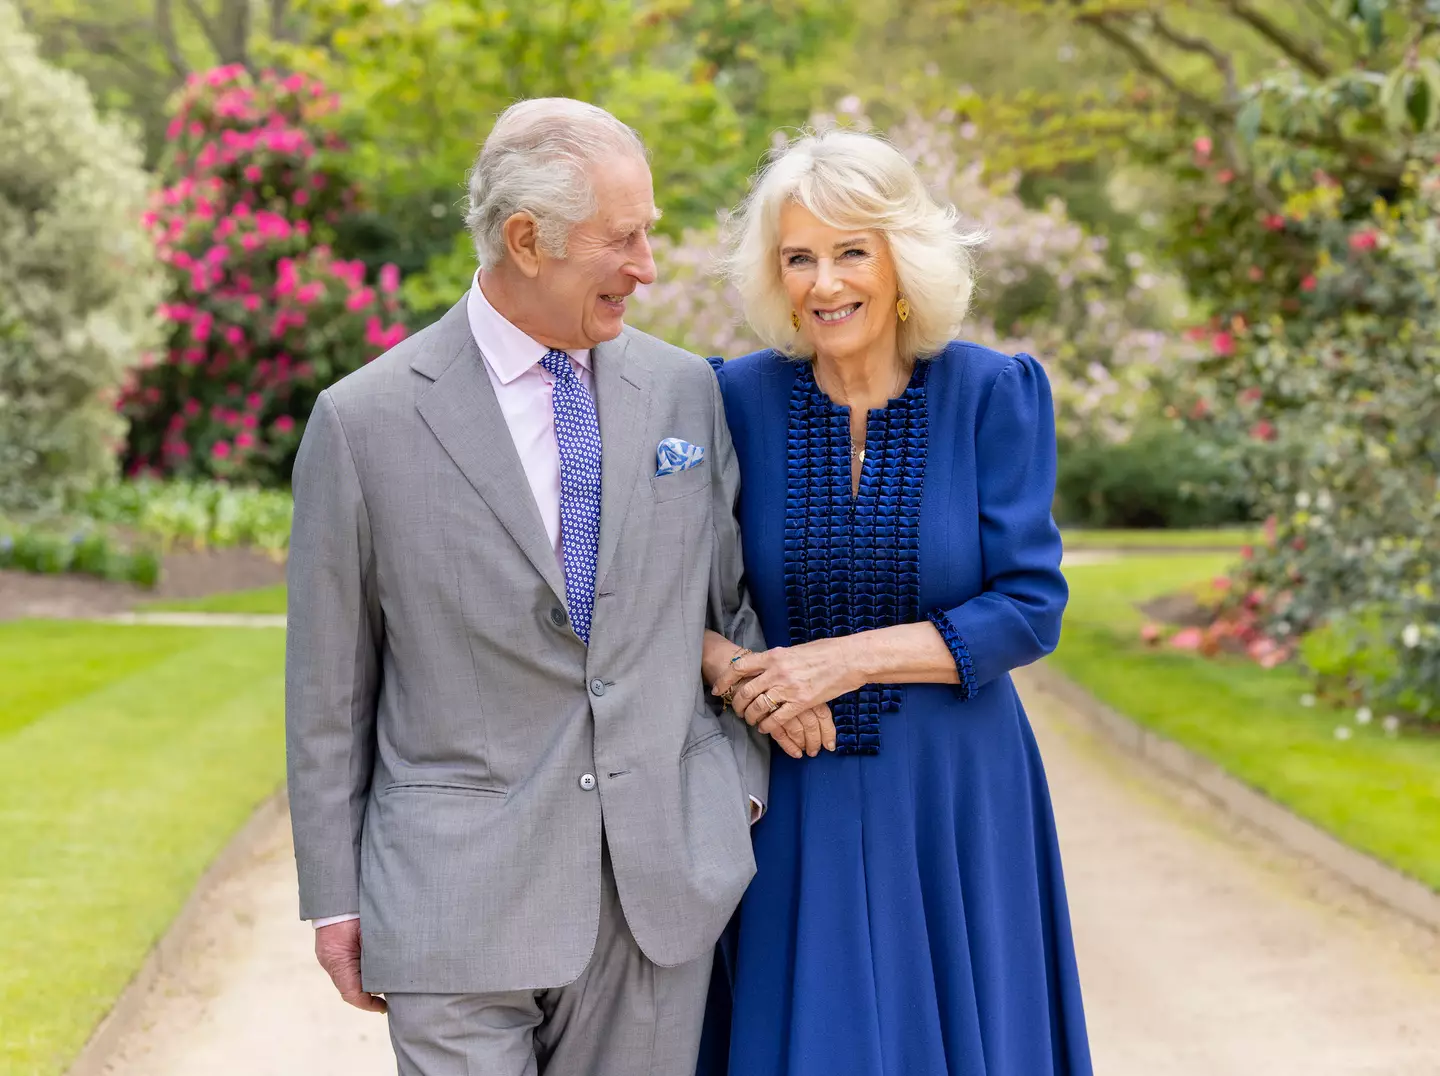 A new photo of Charles and Camilla has been released. (PA)